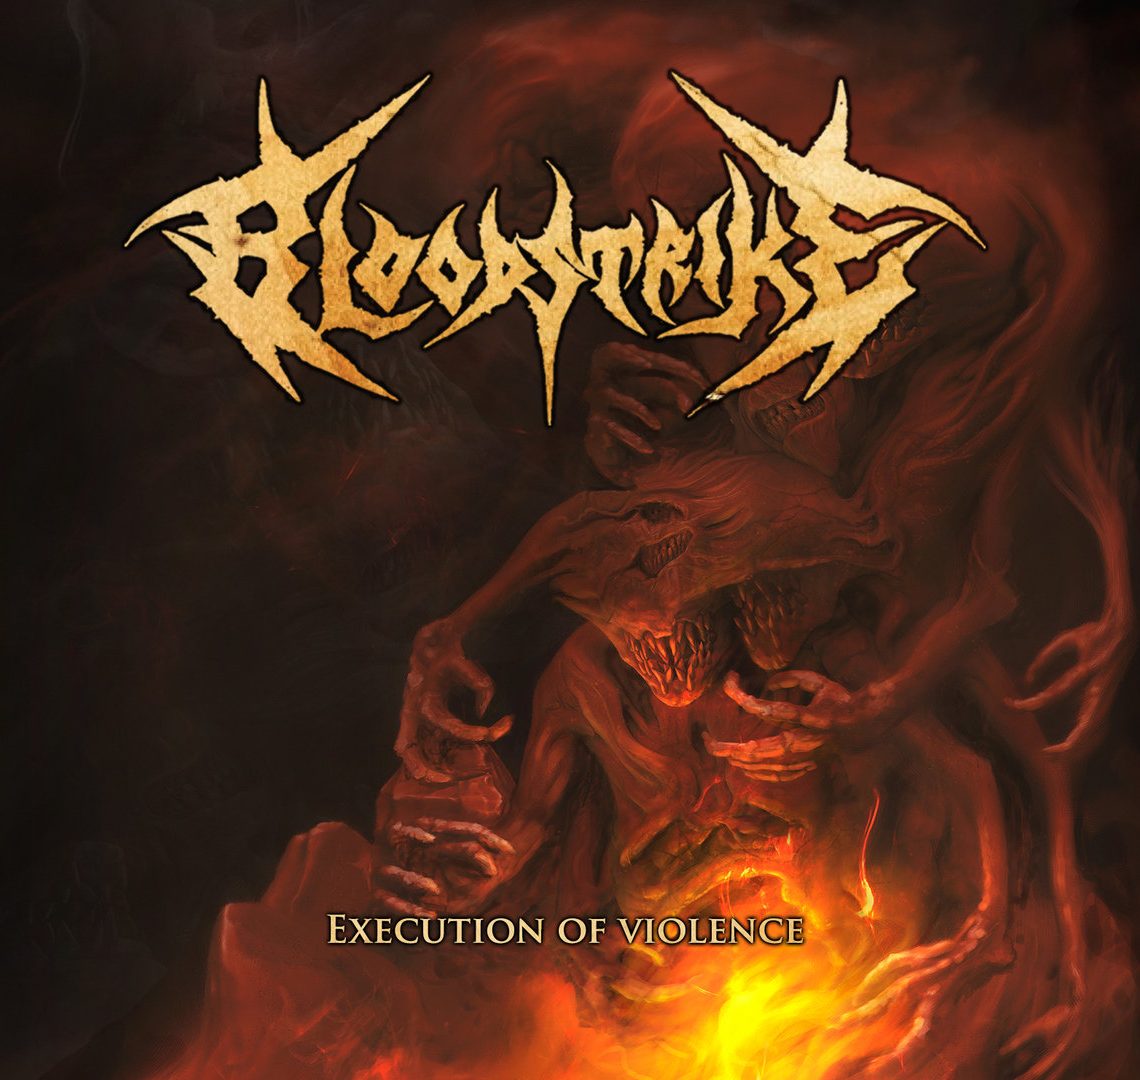 Bloodstrike – Excecution of Violence Review